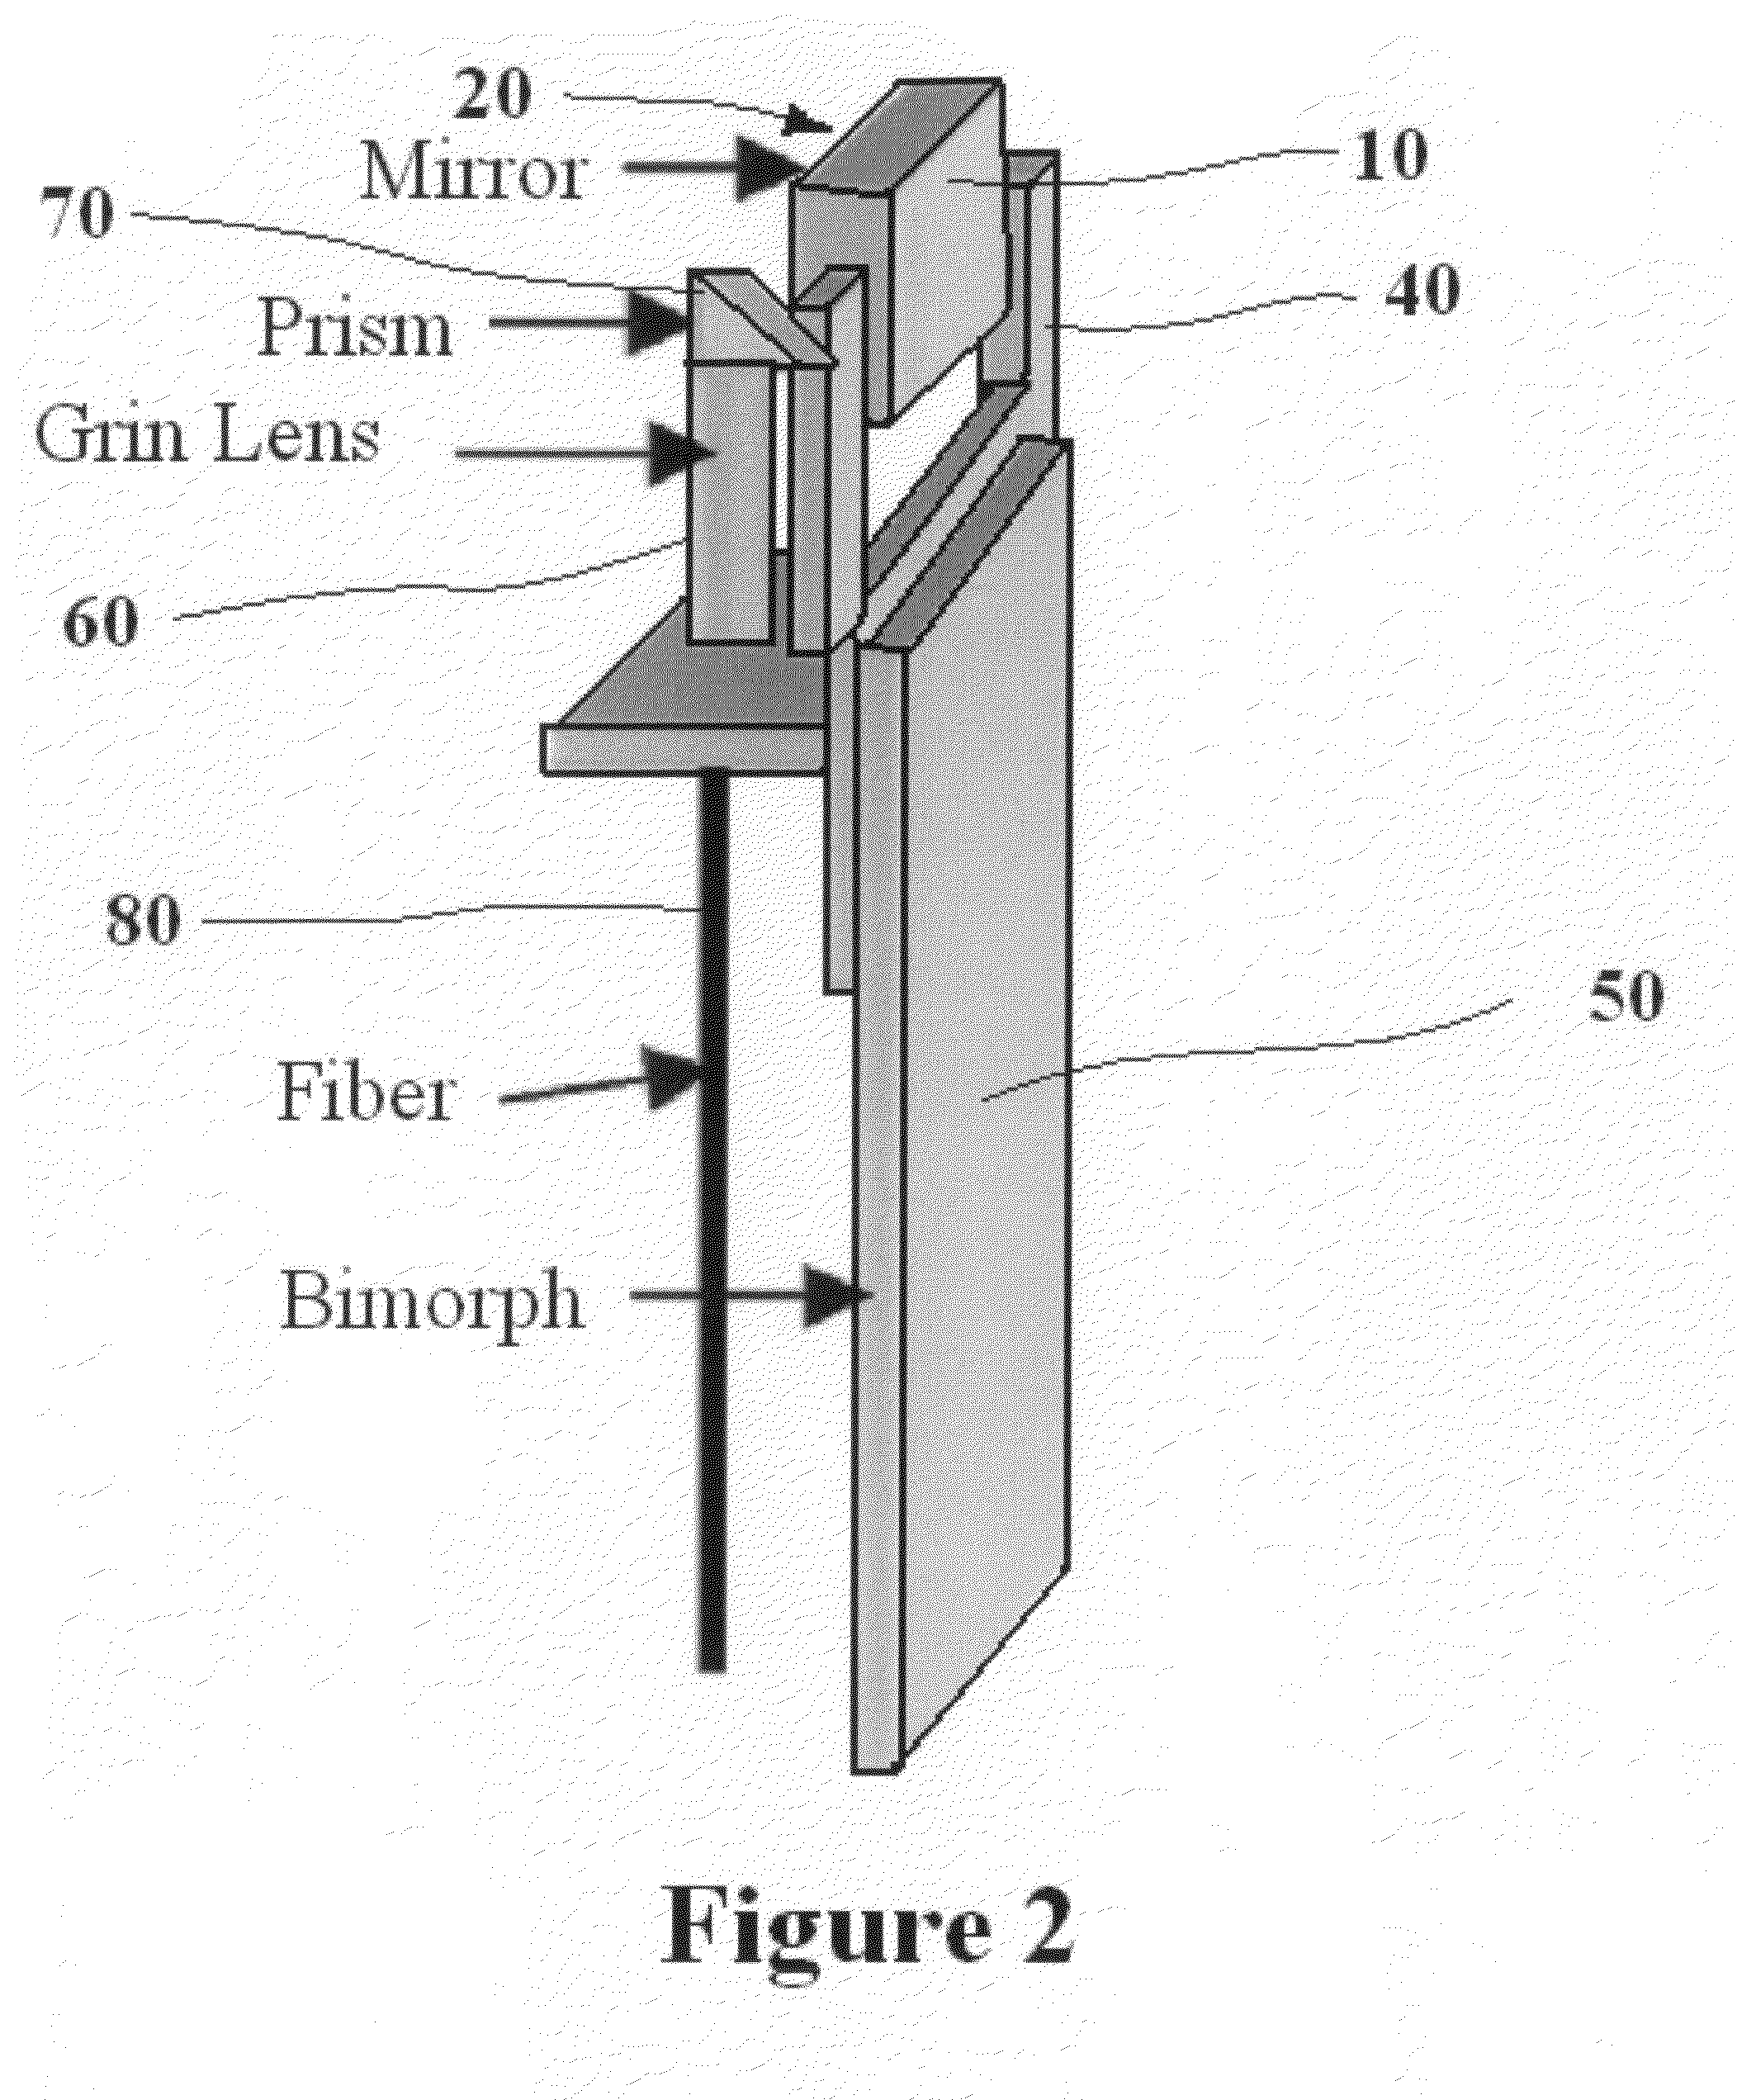 Amplified bimorph scanning mirror, optical system and method of scanning